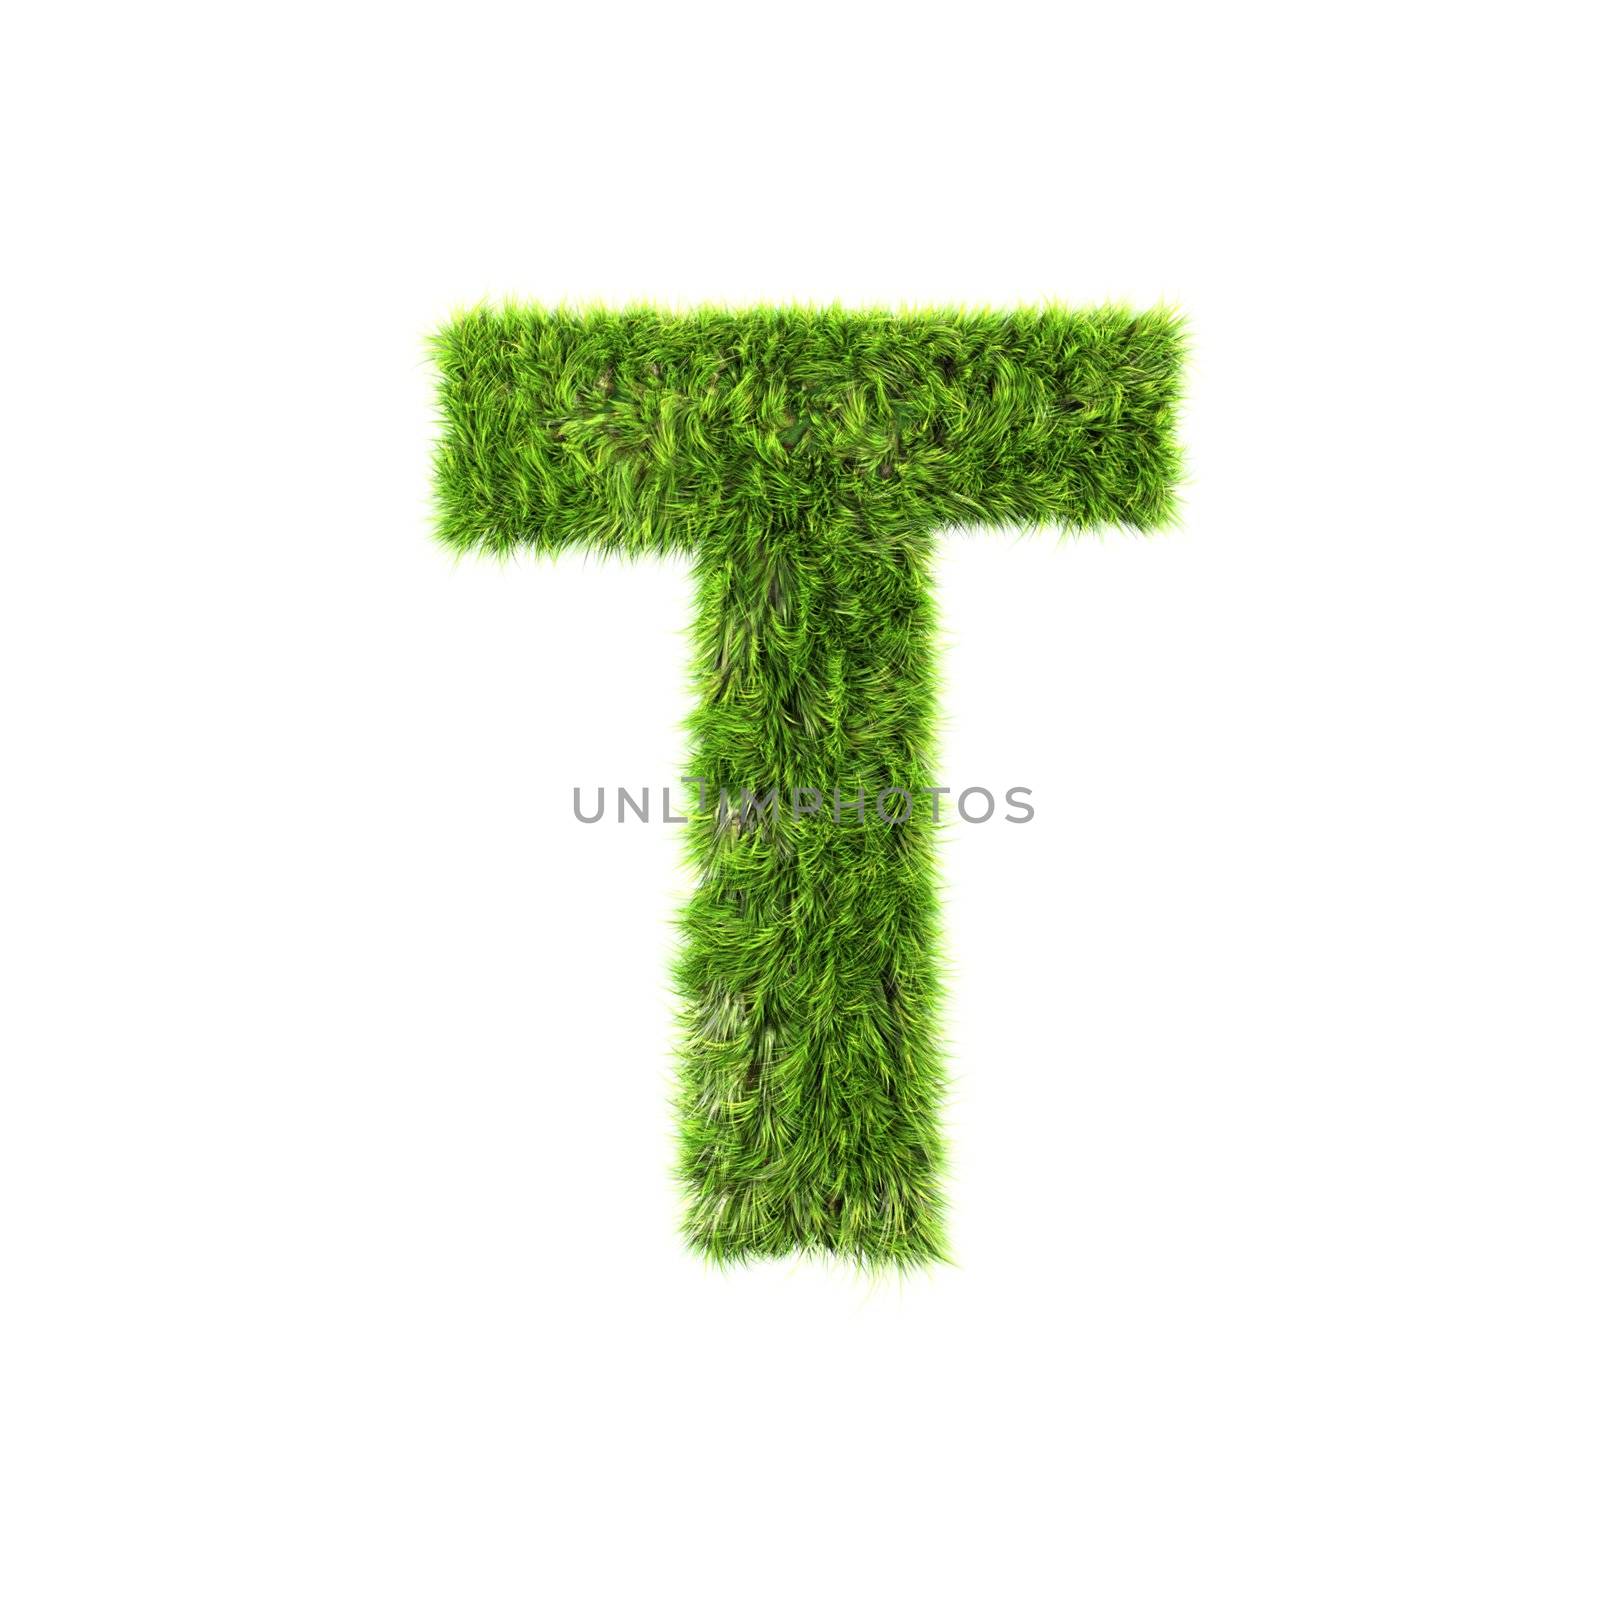 3d grass letter isolated on white background - T by chrisroll